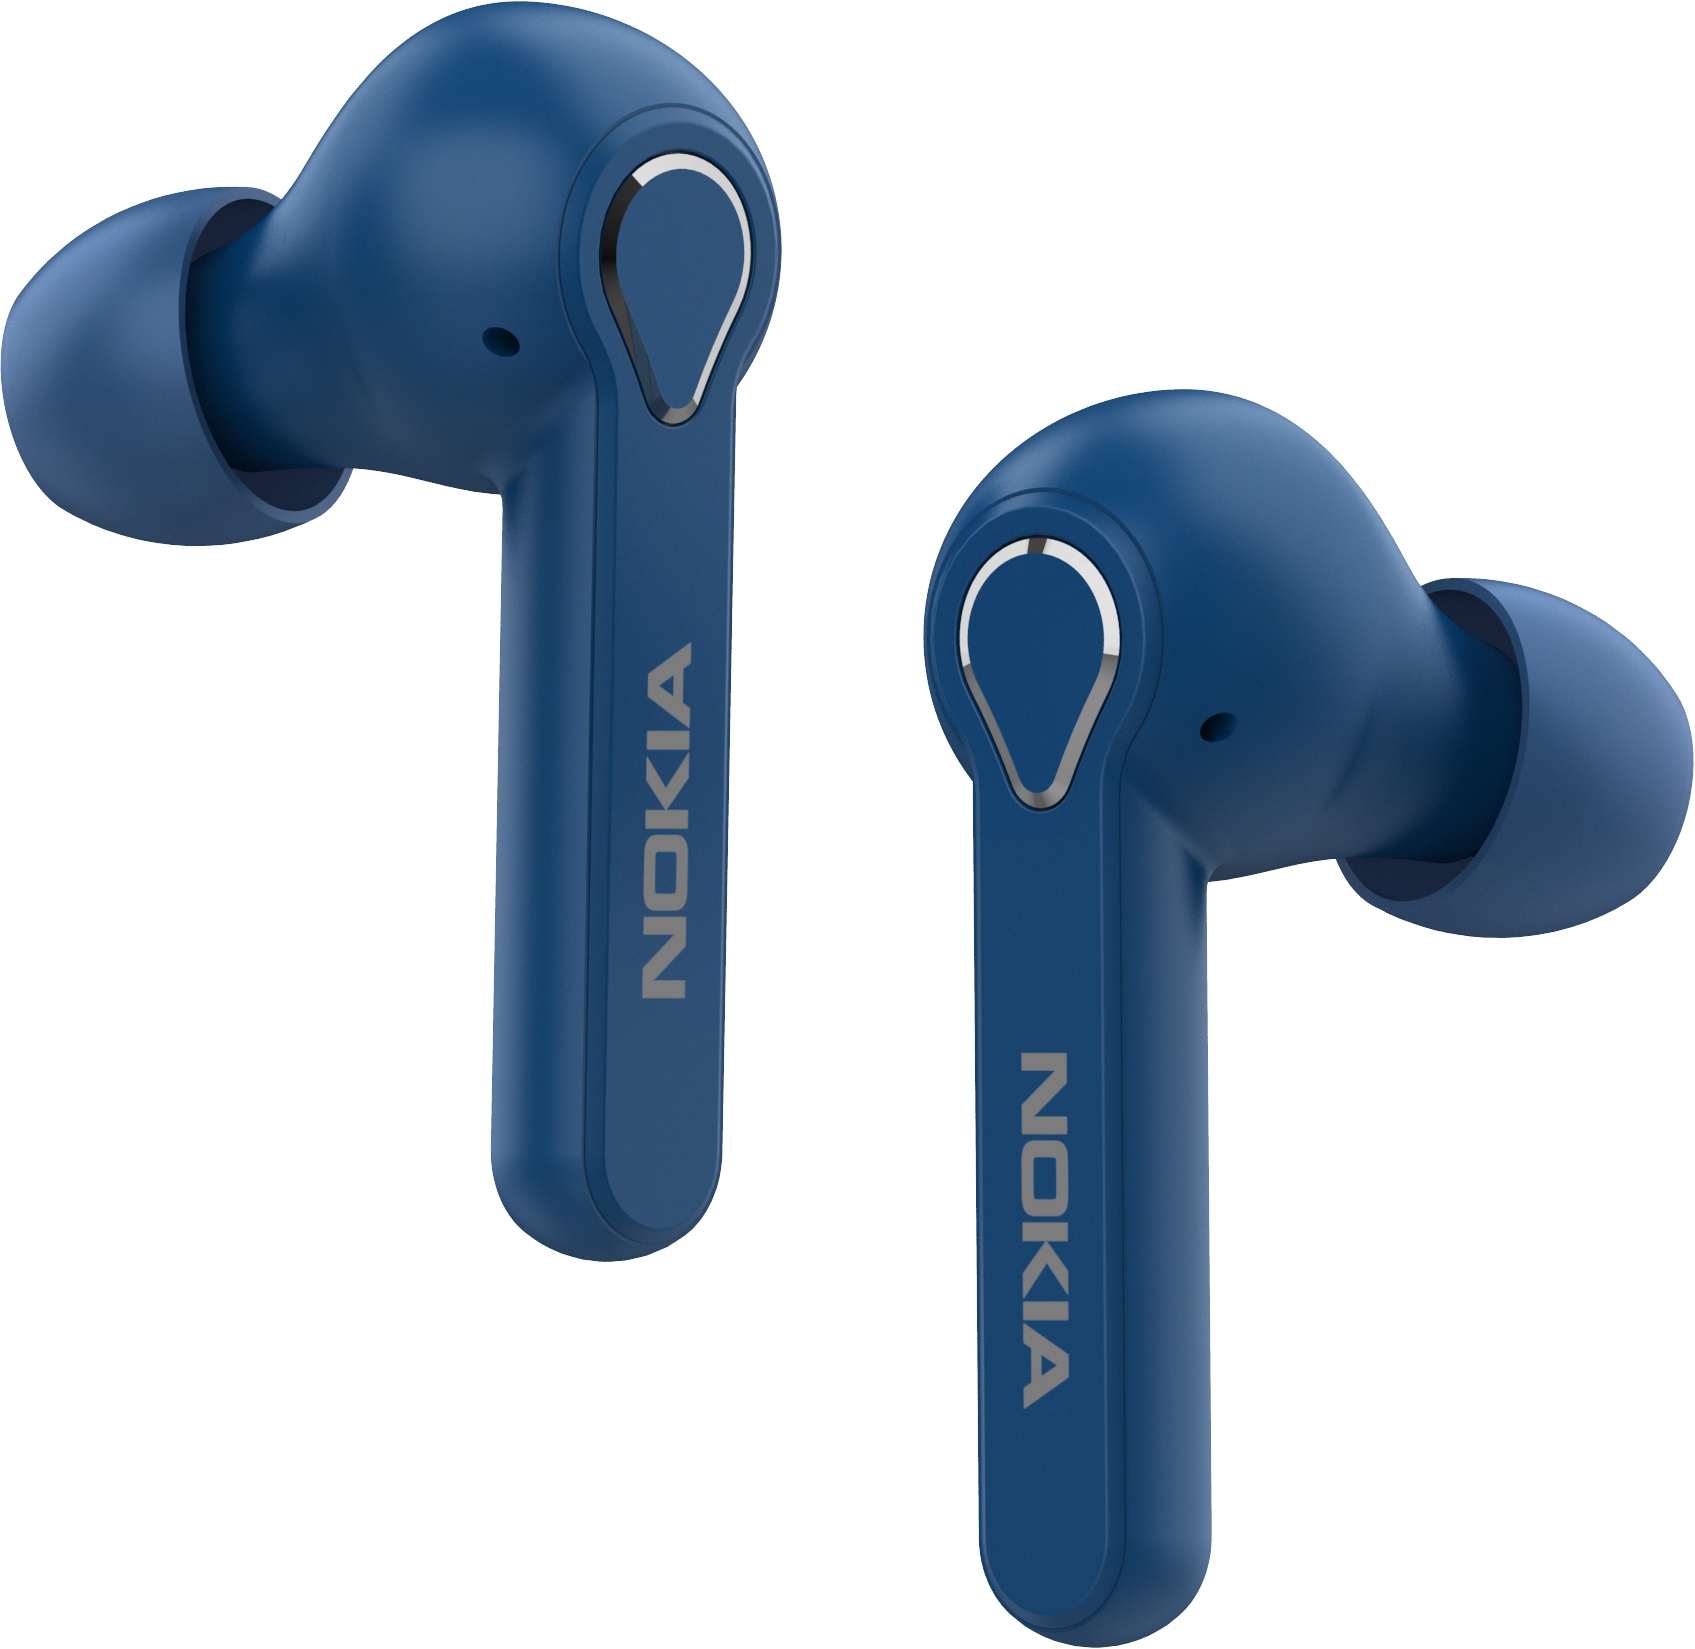 Classic Earbuds Transparent Image